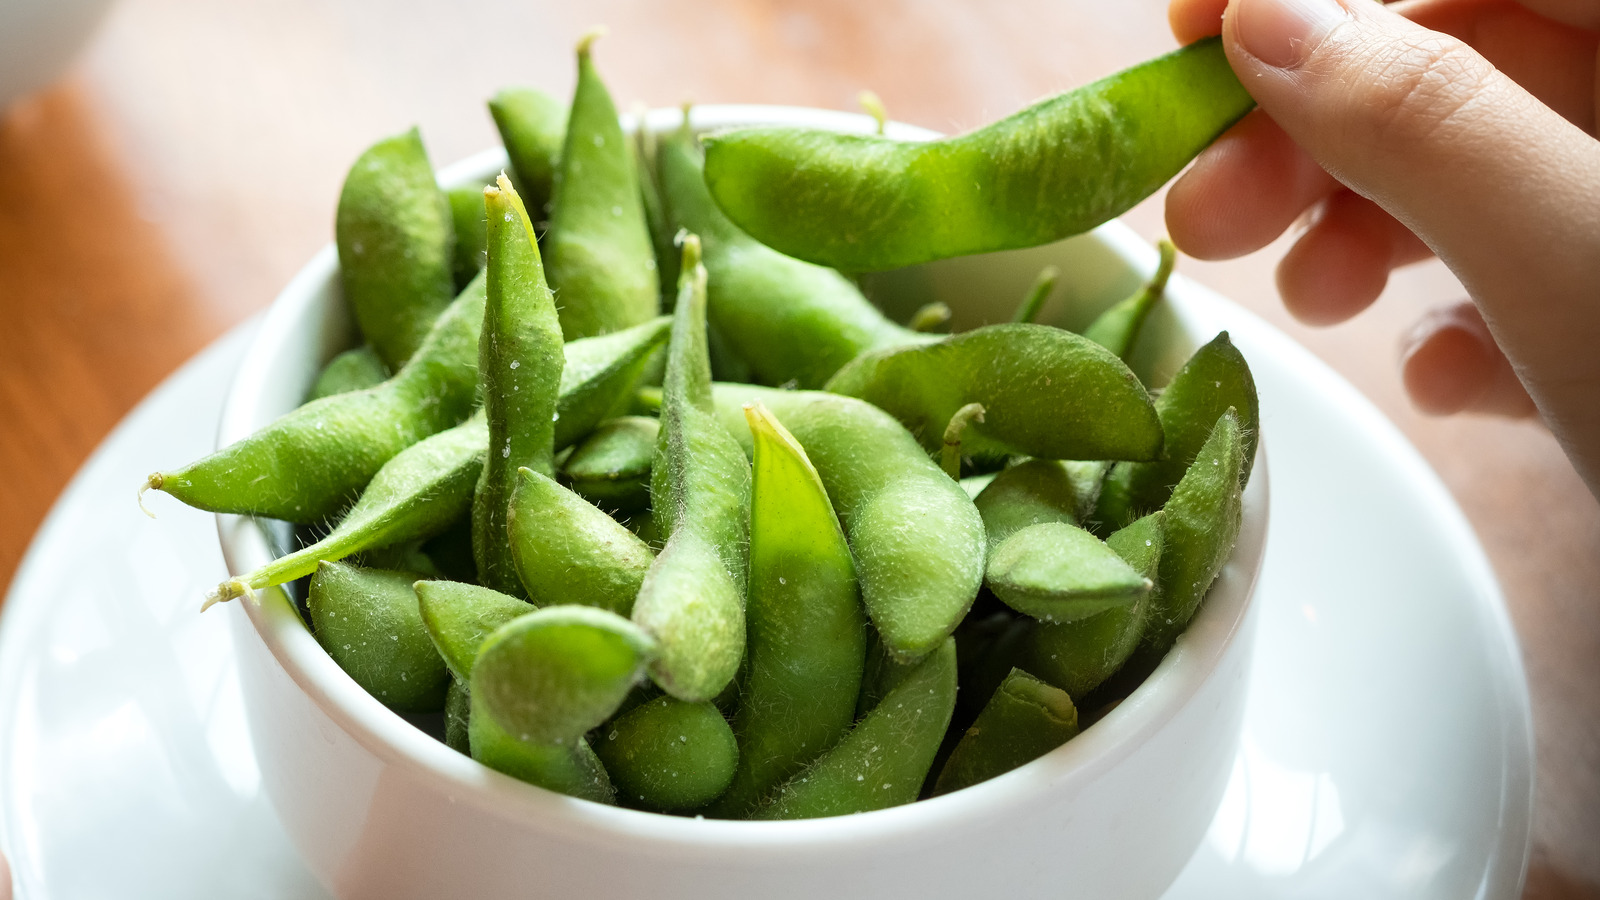 16 Tips You Need When Cooking With Edamame – Tasting Table